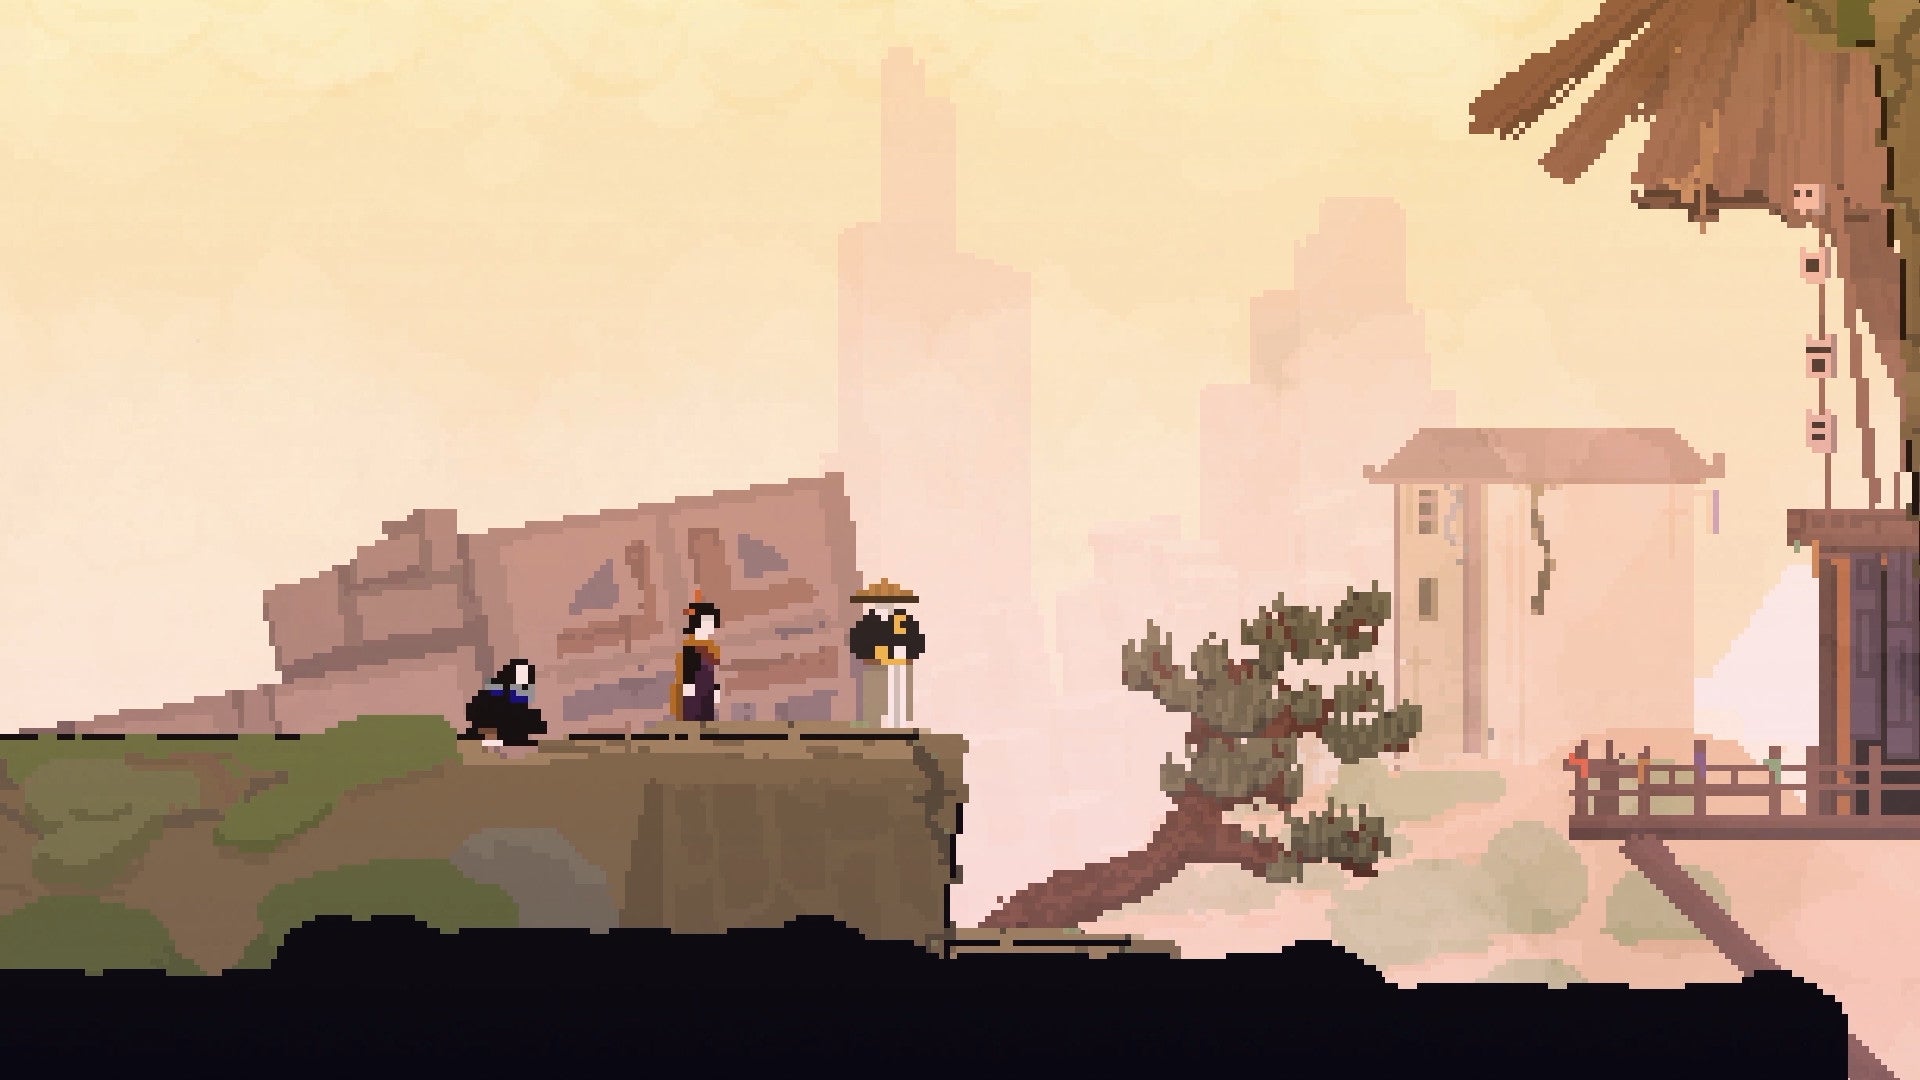 An Olija screenshot showing people in a ruined city.